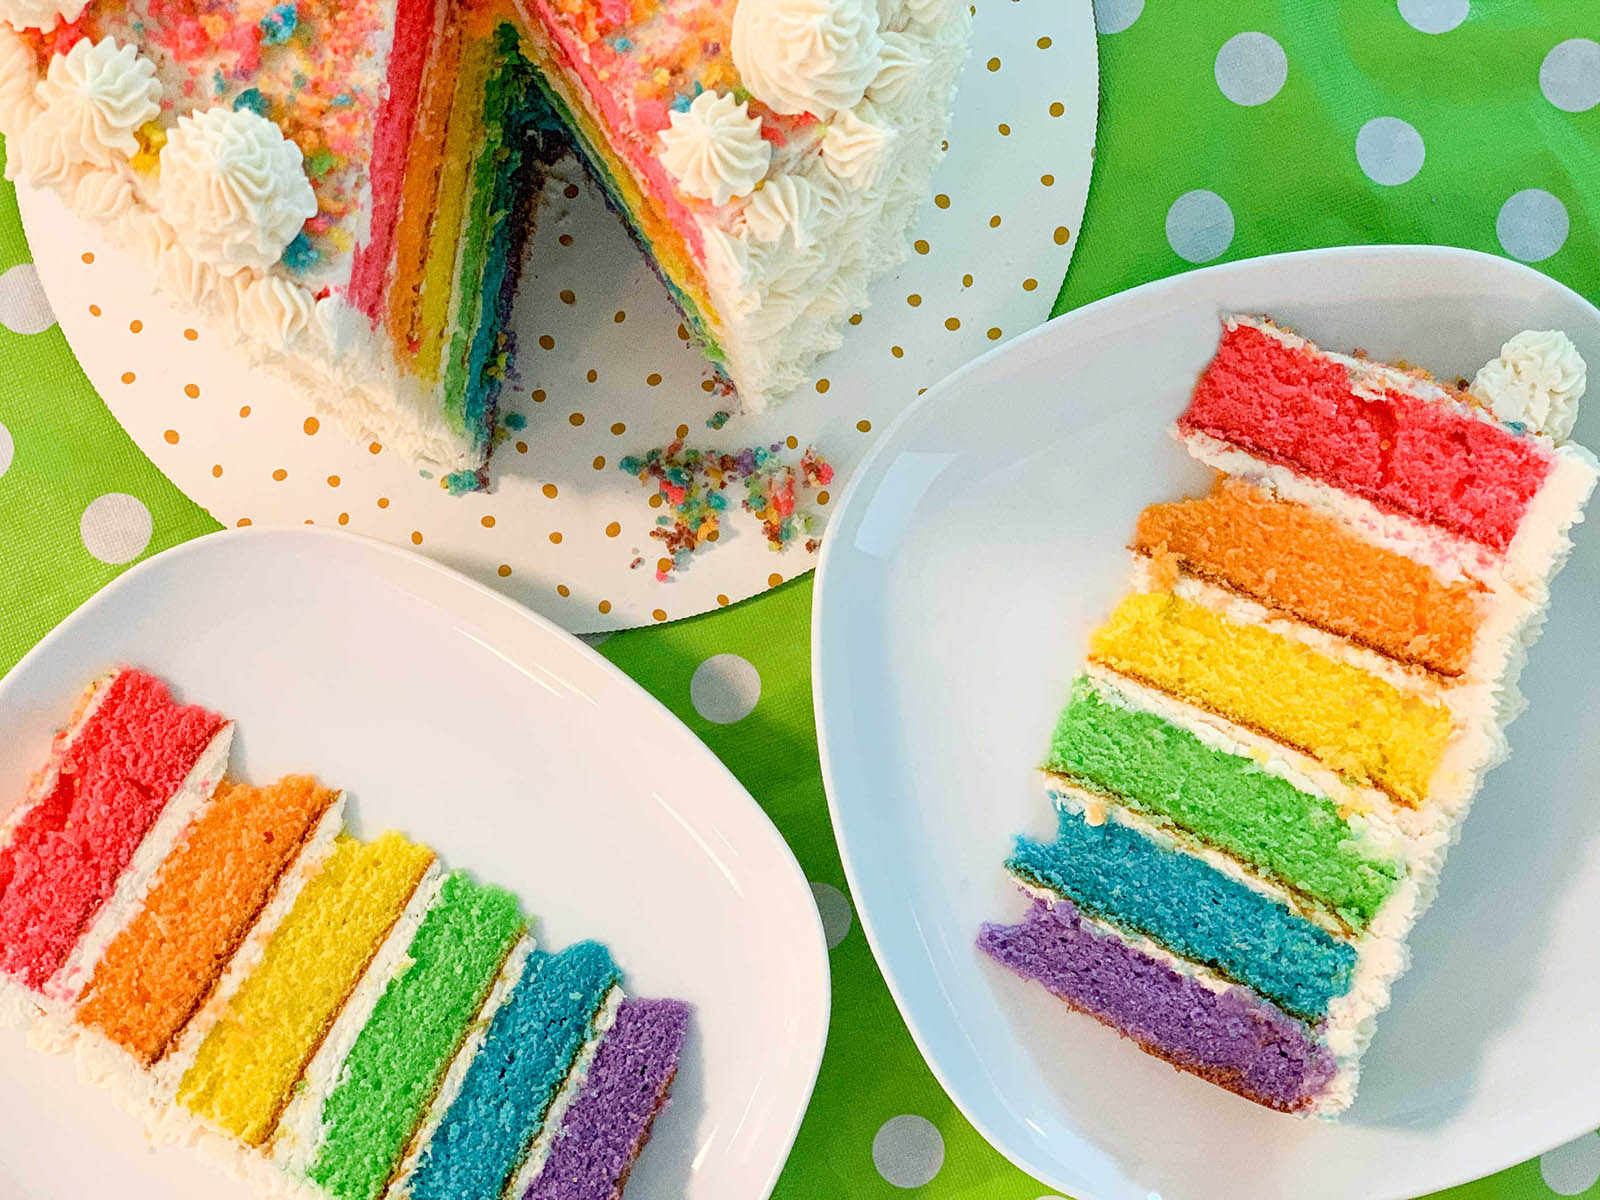 🍰 We’re Pretty Sure We Know Your Birth Month Based on the Cakes You’ve Eaten Rainbow layer cake